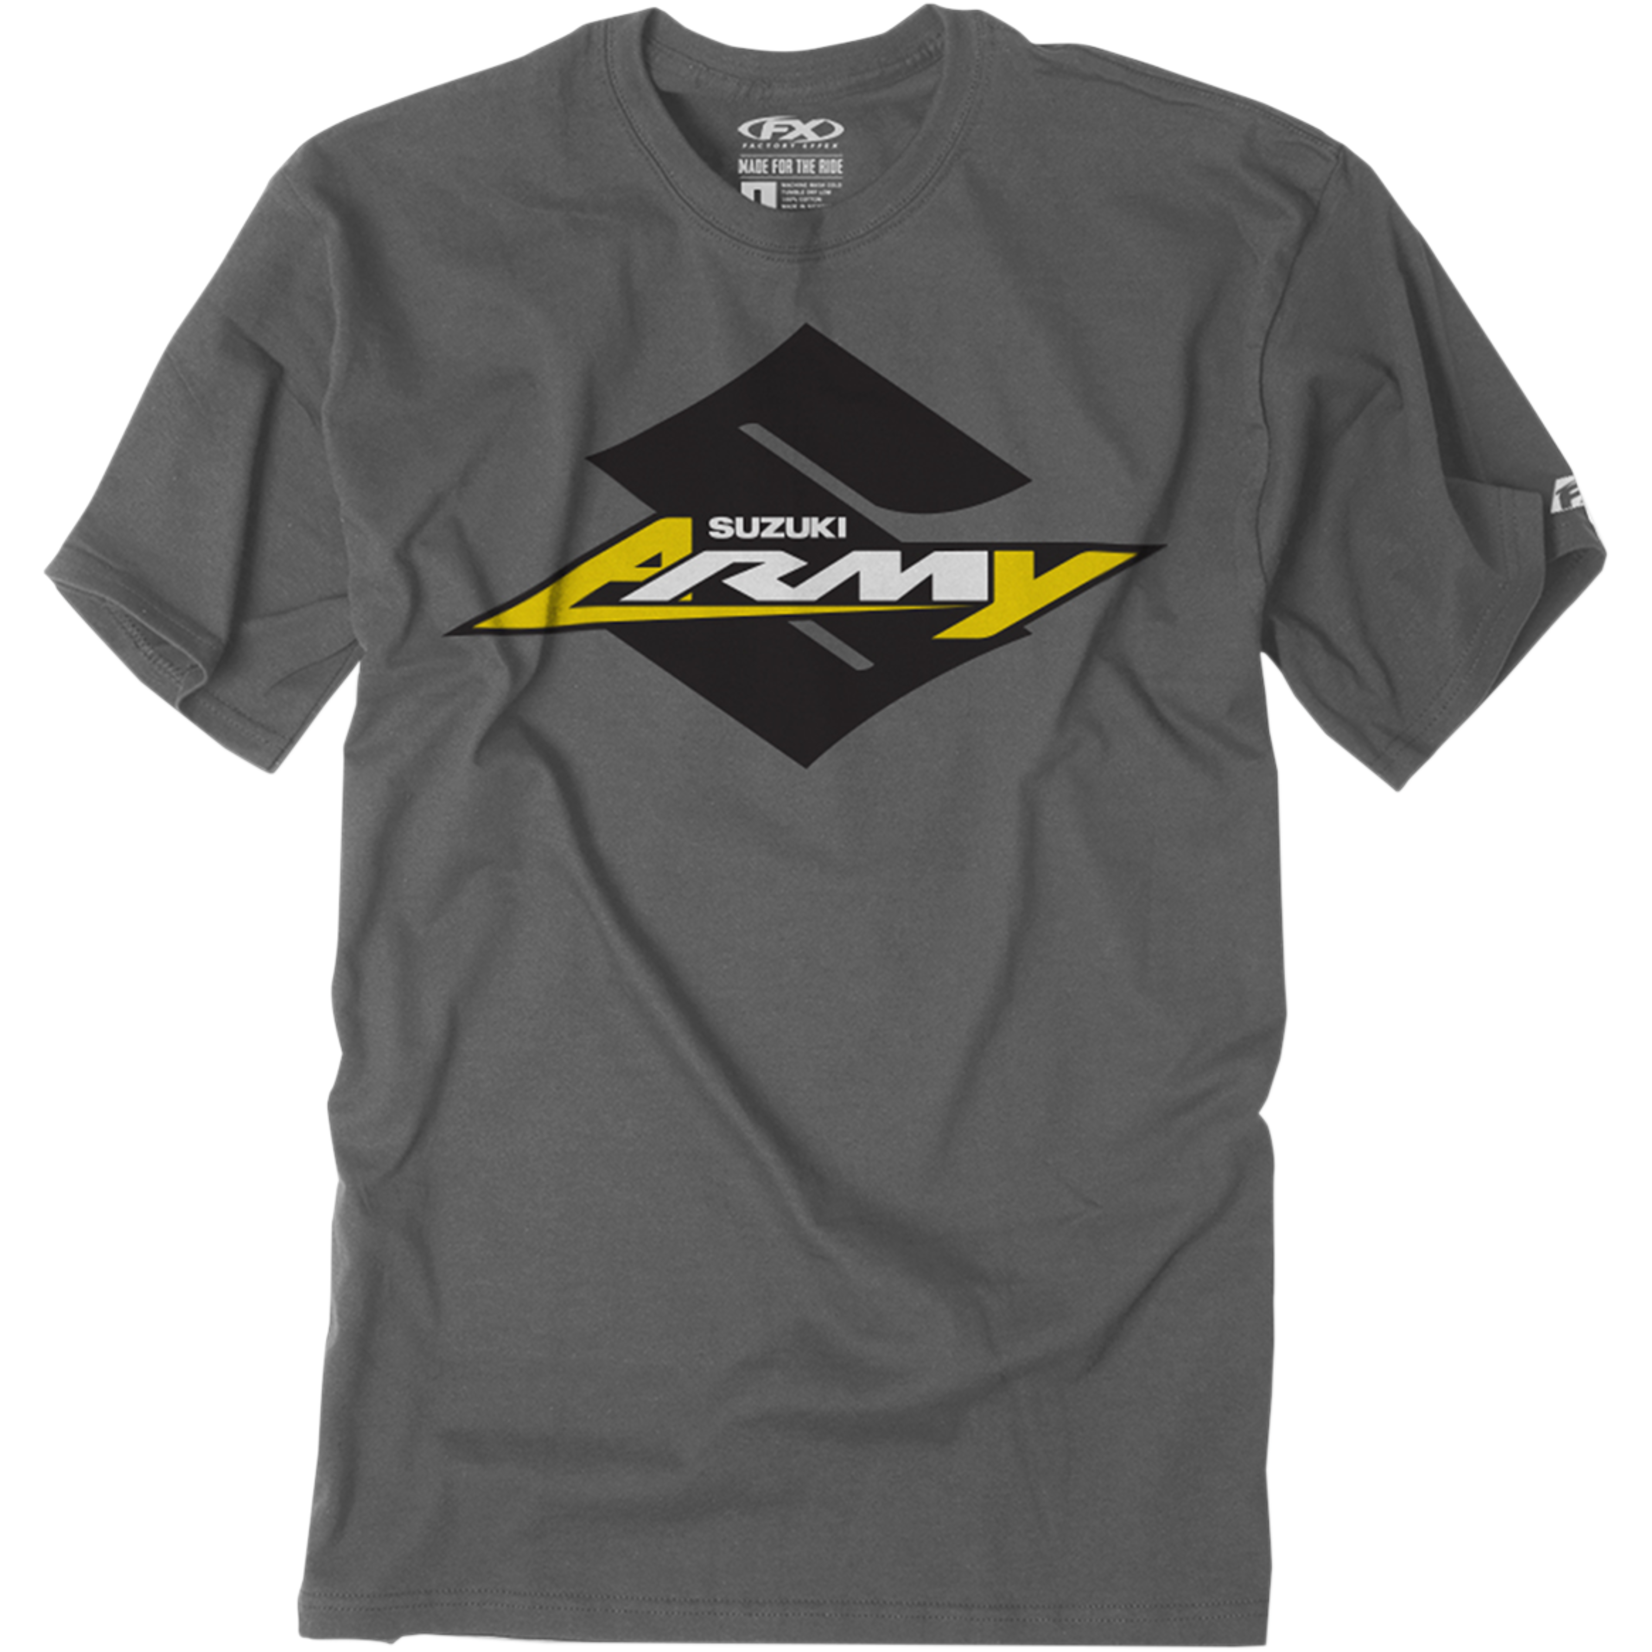 FACTORY EFFEX Youth Suzuki Army Tee, Charcoal